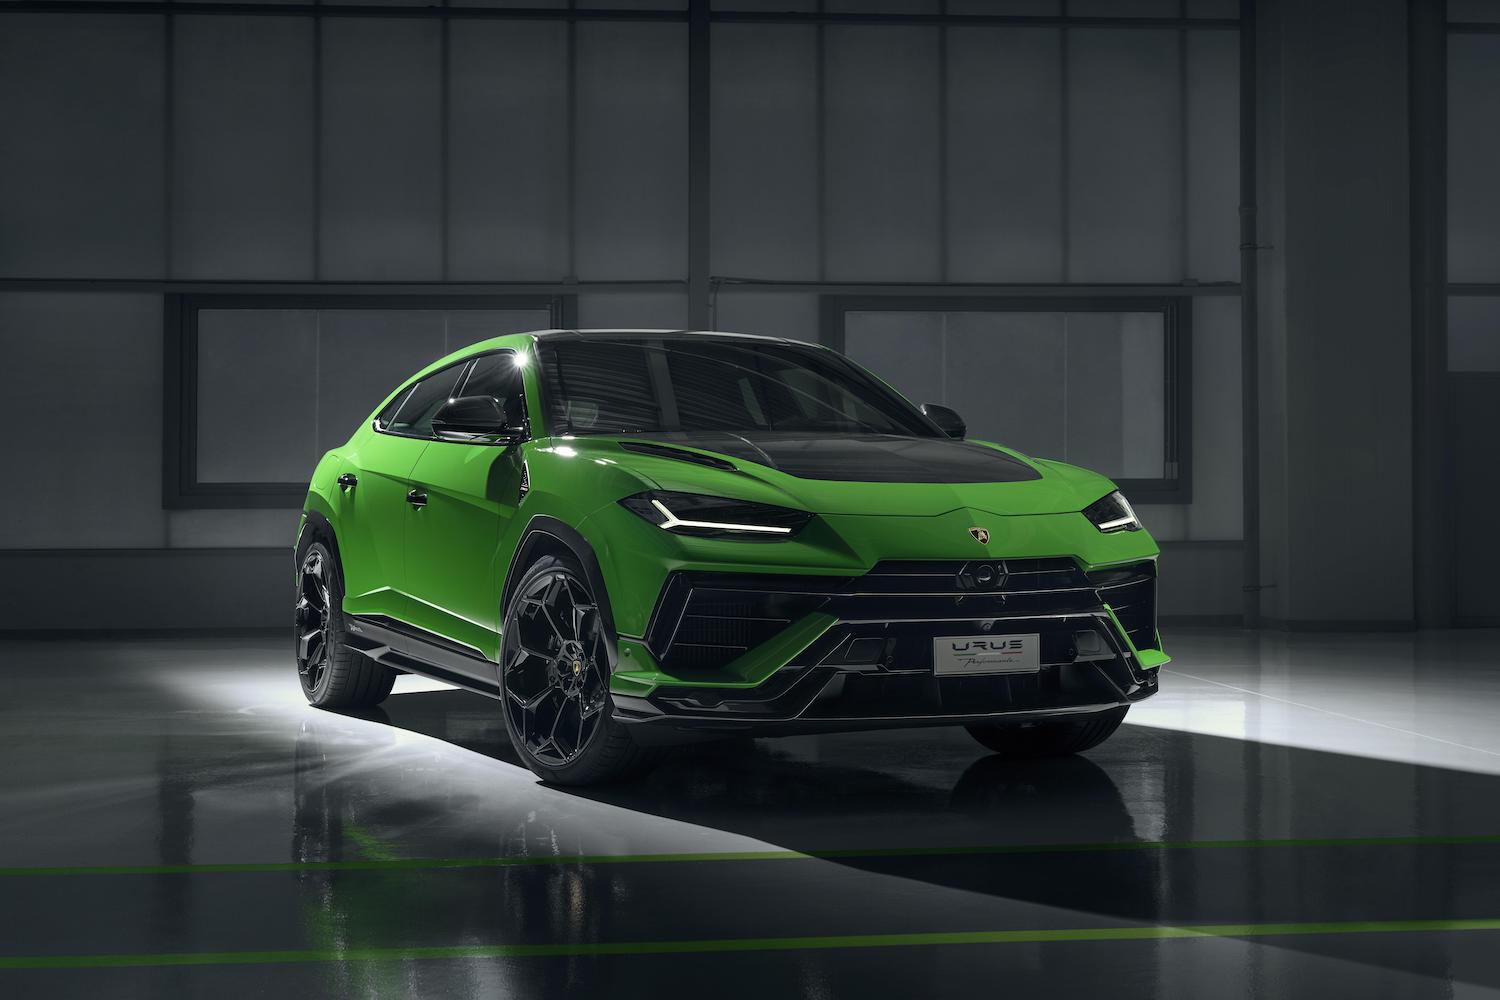 Lamborghini Urus Went to The Aftermarket Gym, Returns with